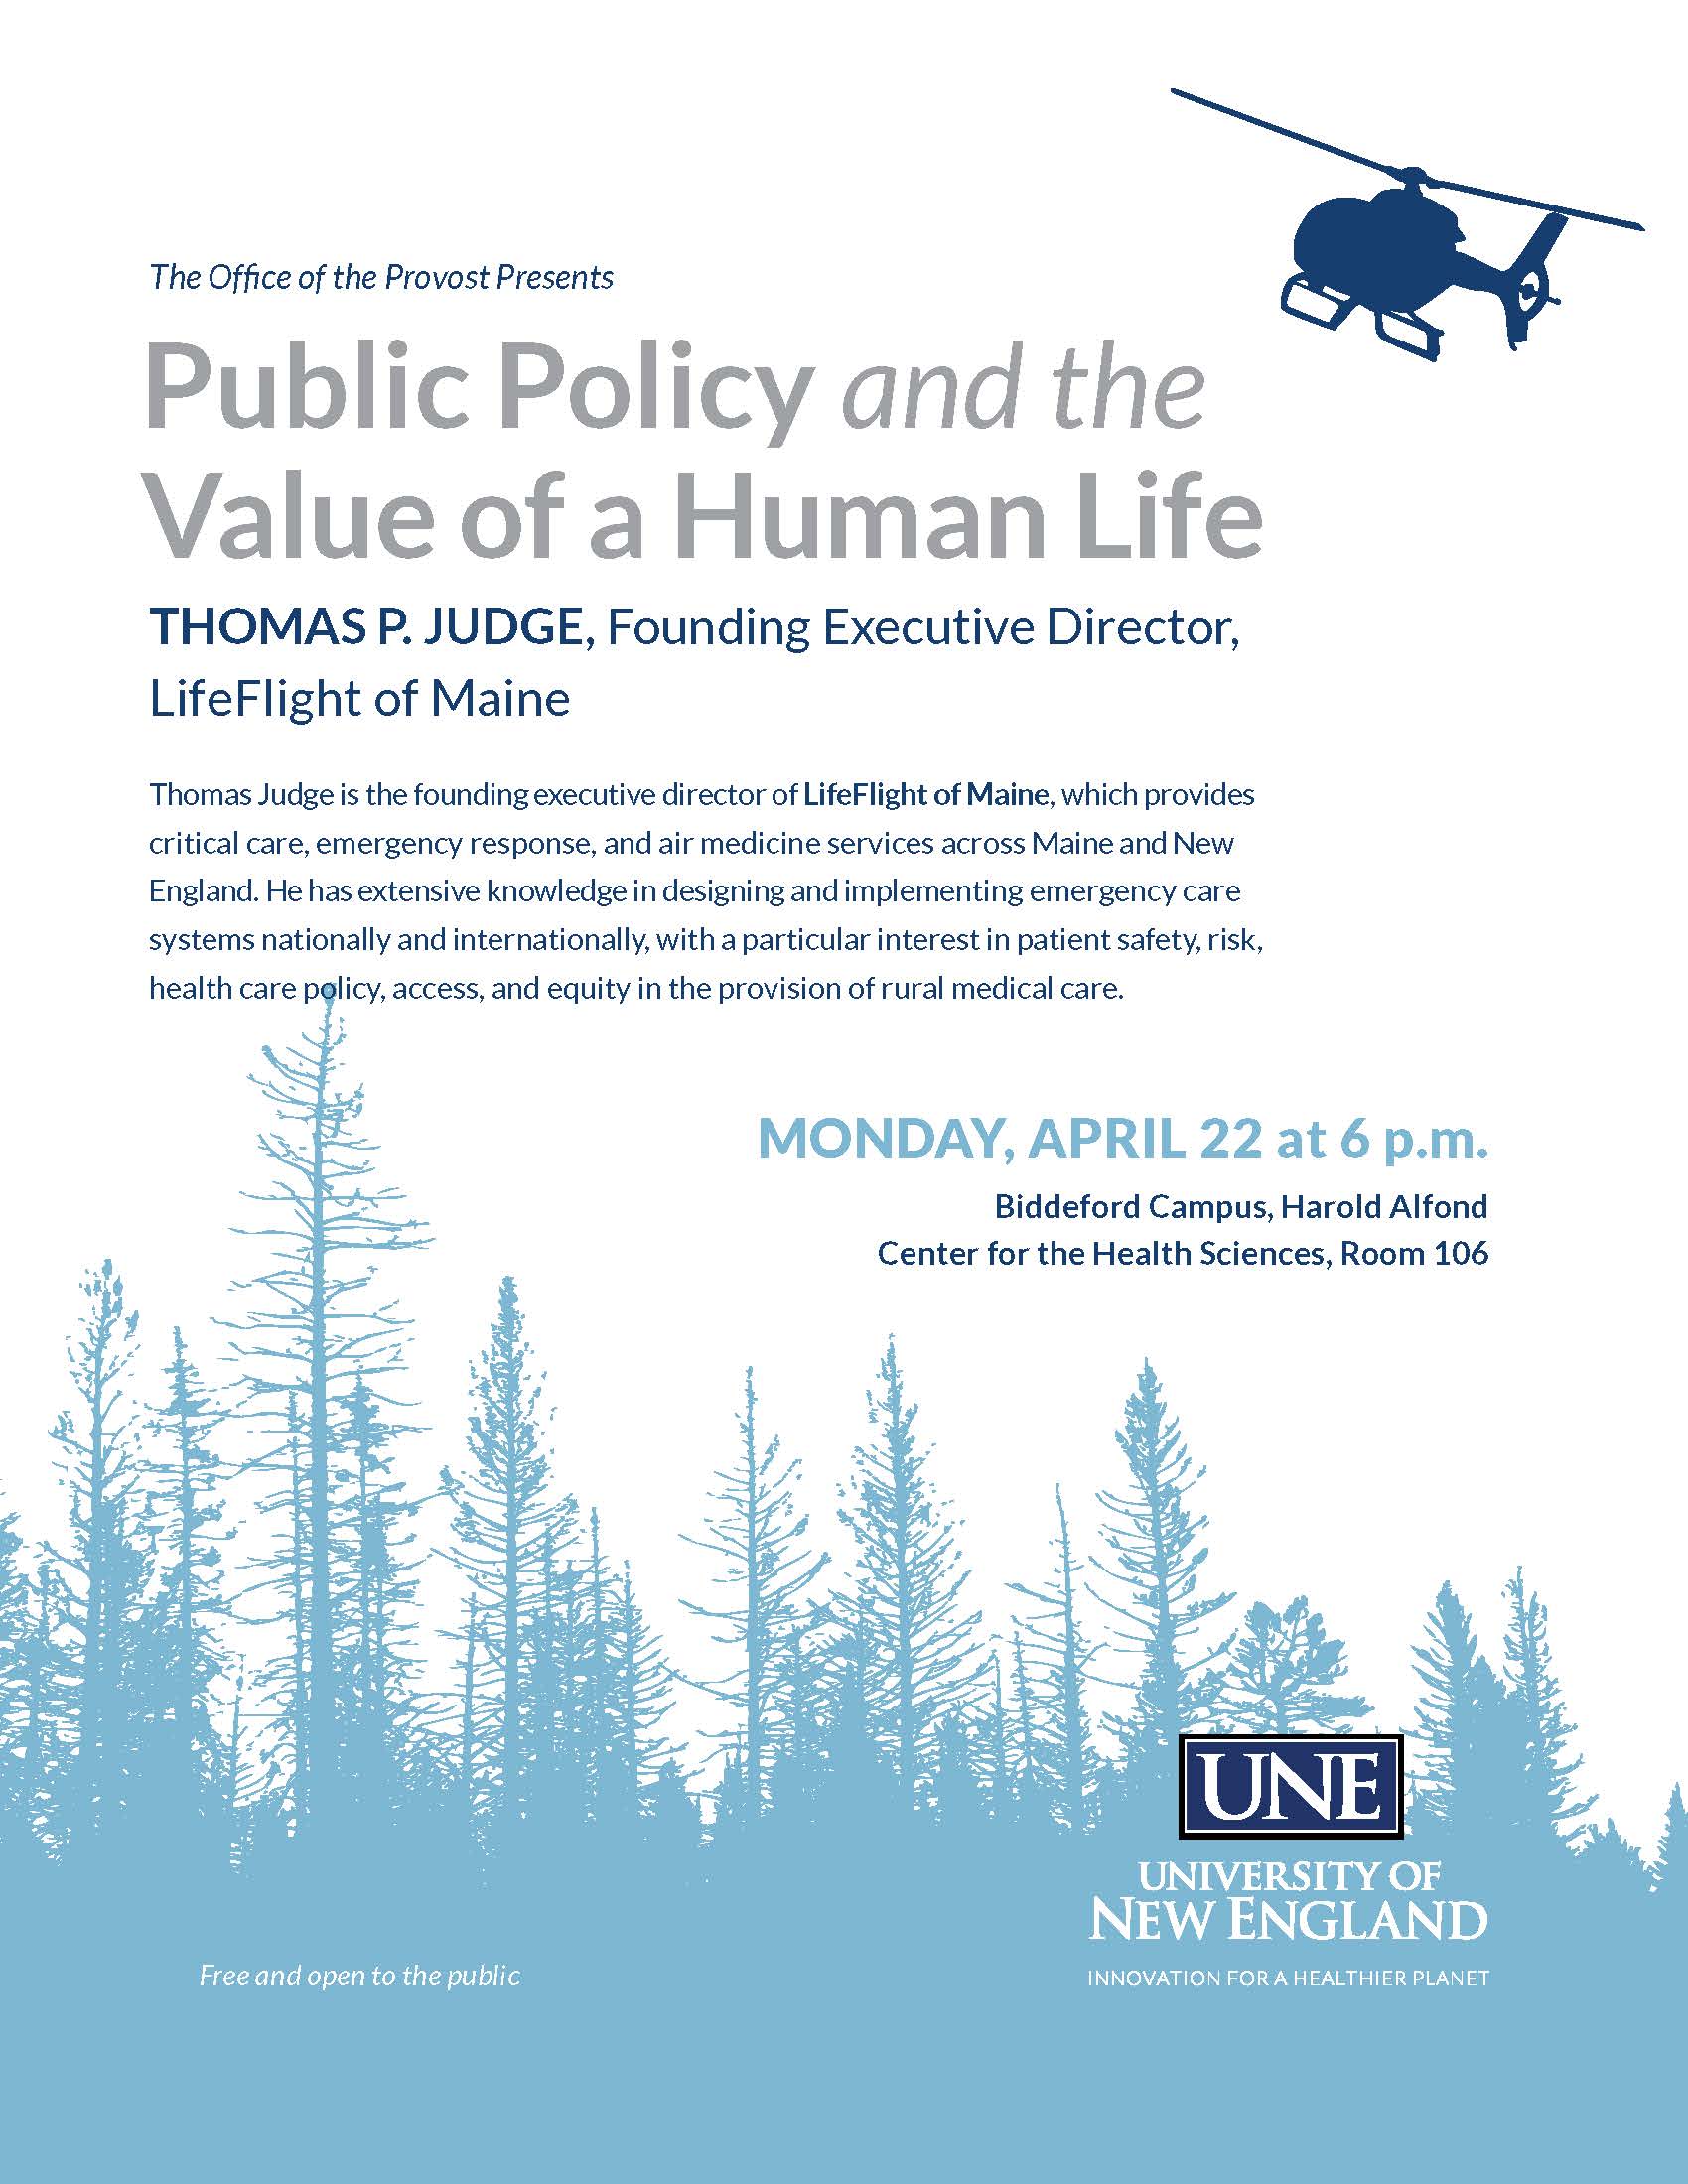 Public Policy and the Value of a Human Life event flyer